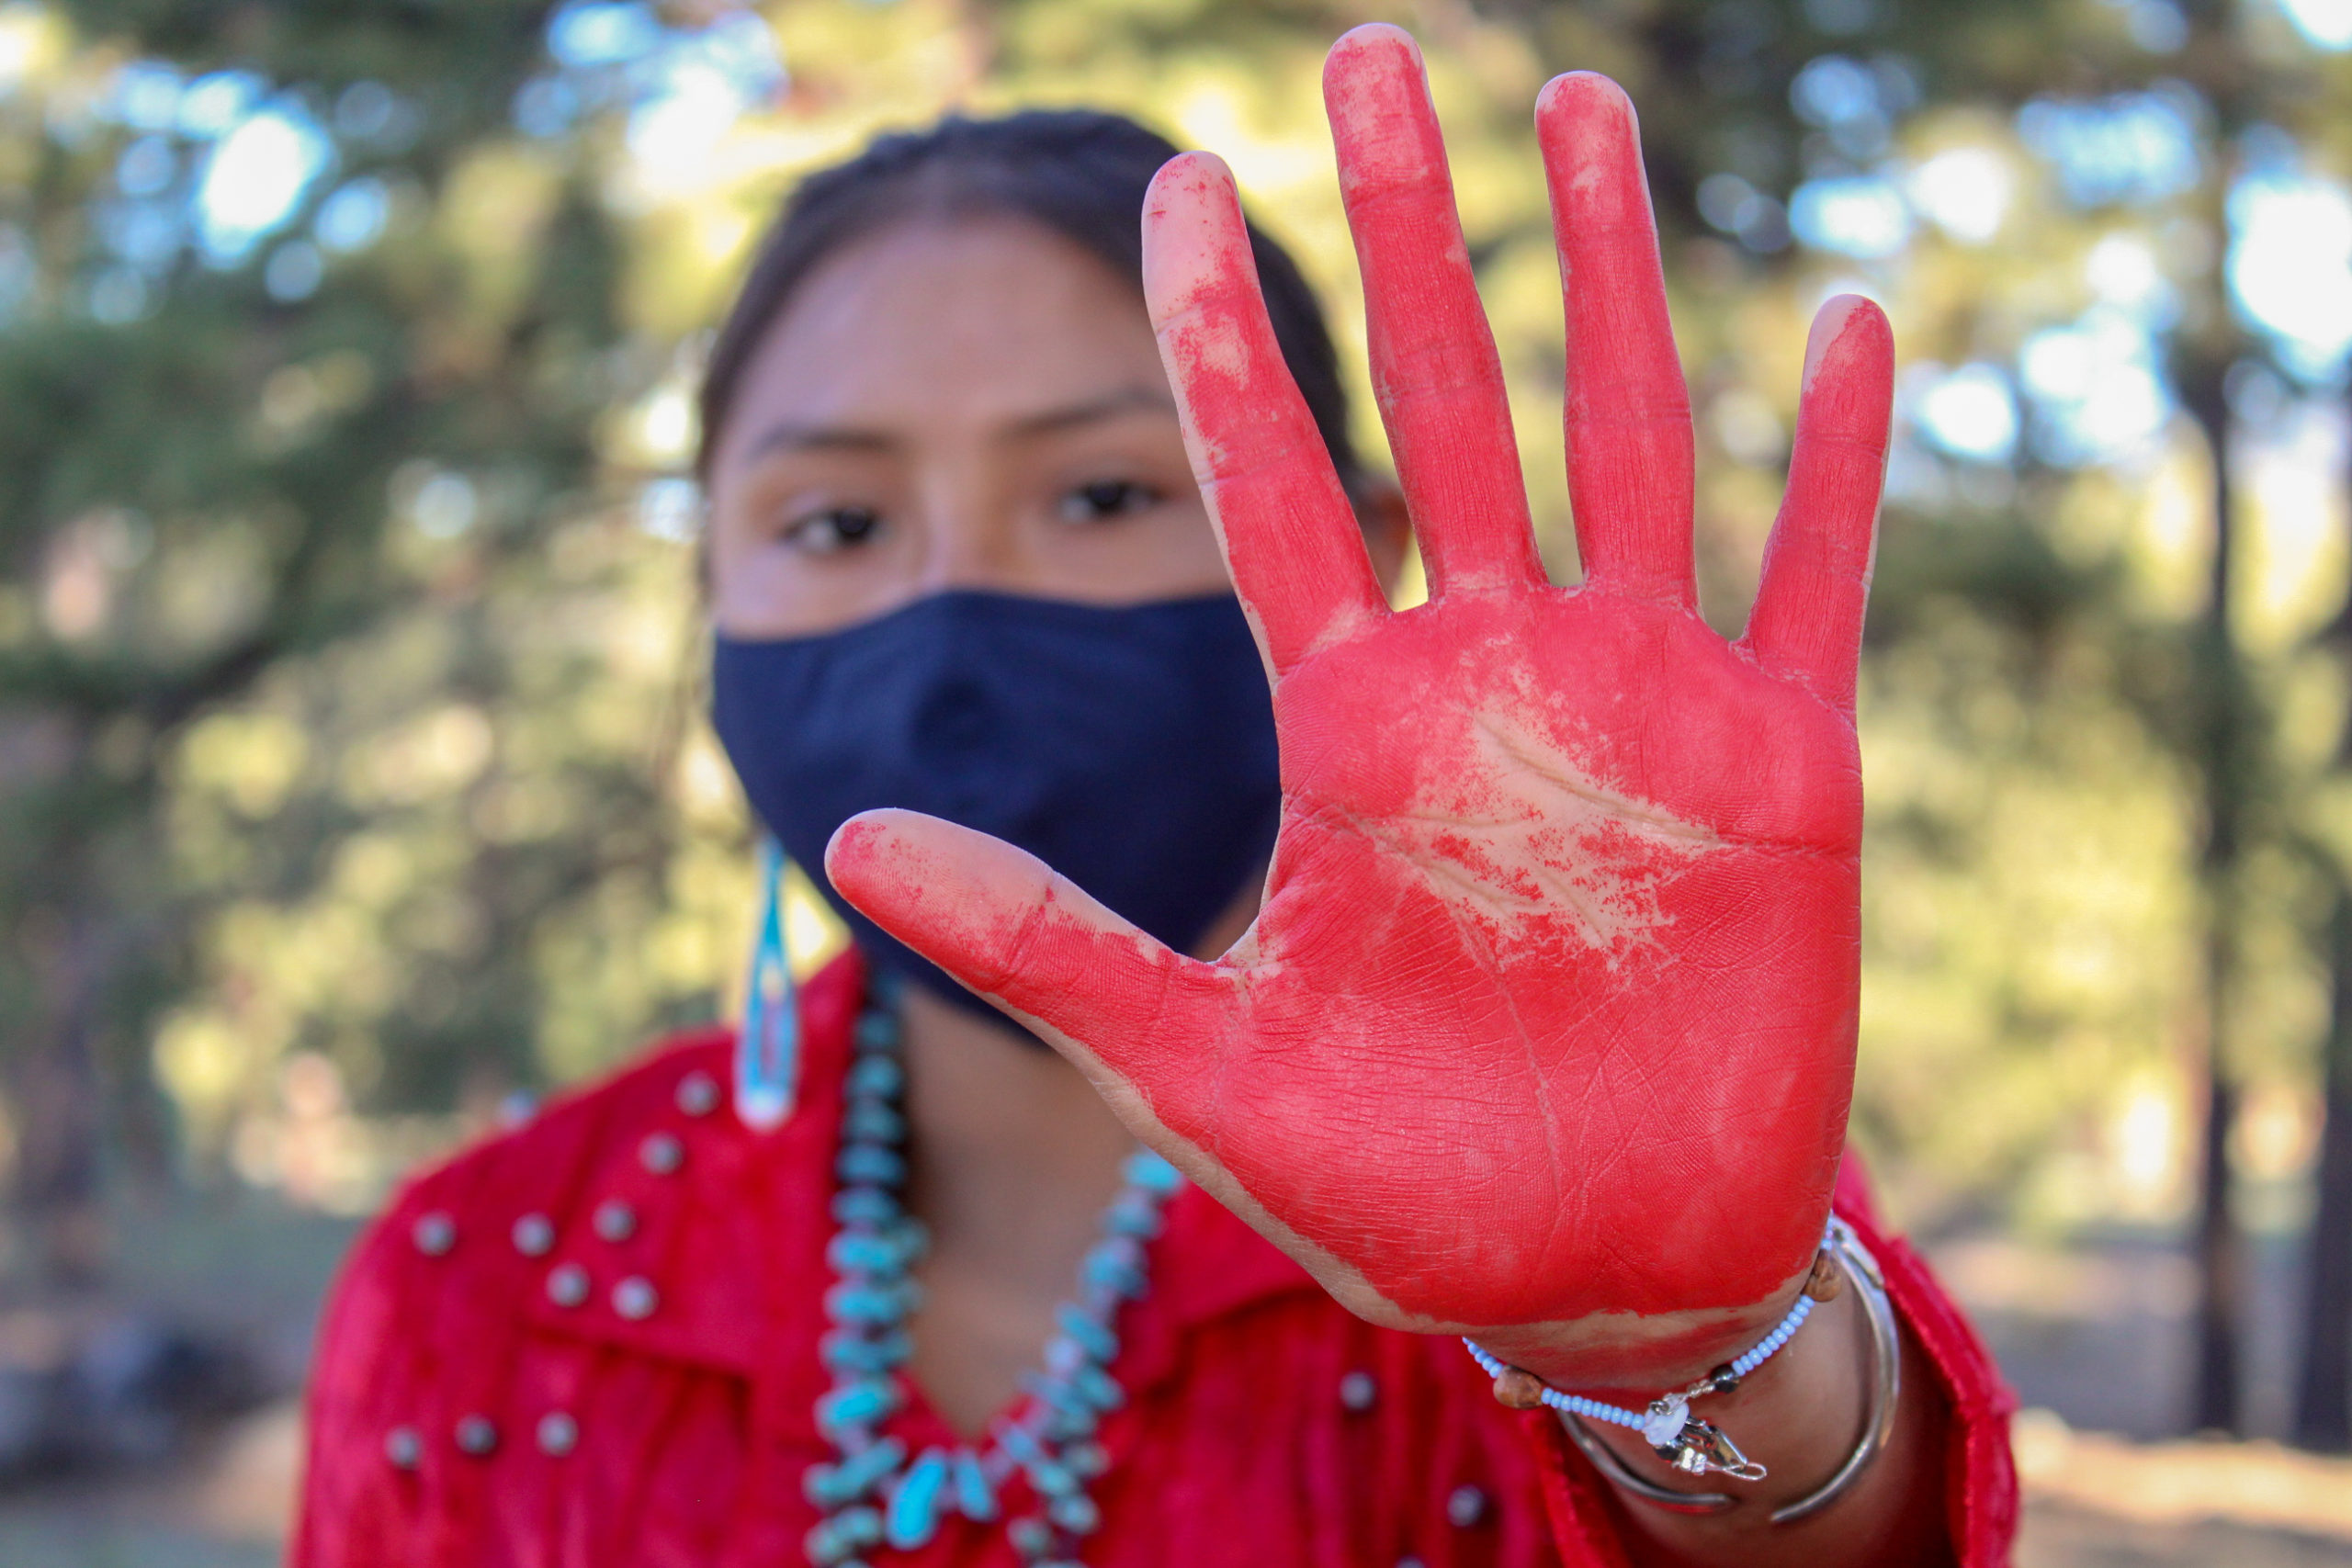 Indigenous woman holding out painted hand as a symbol for awareness